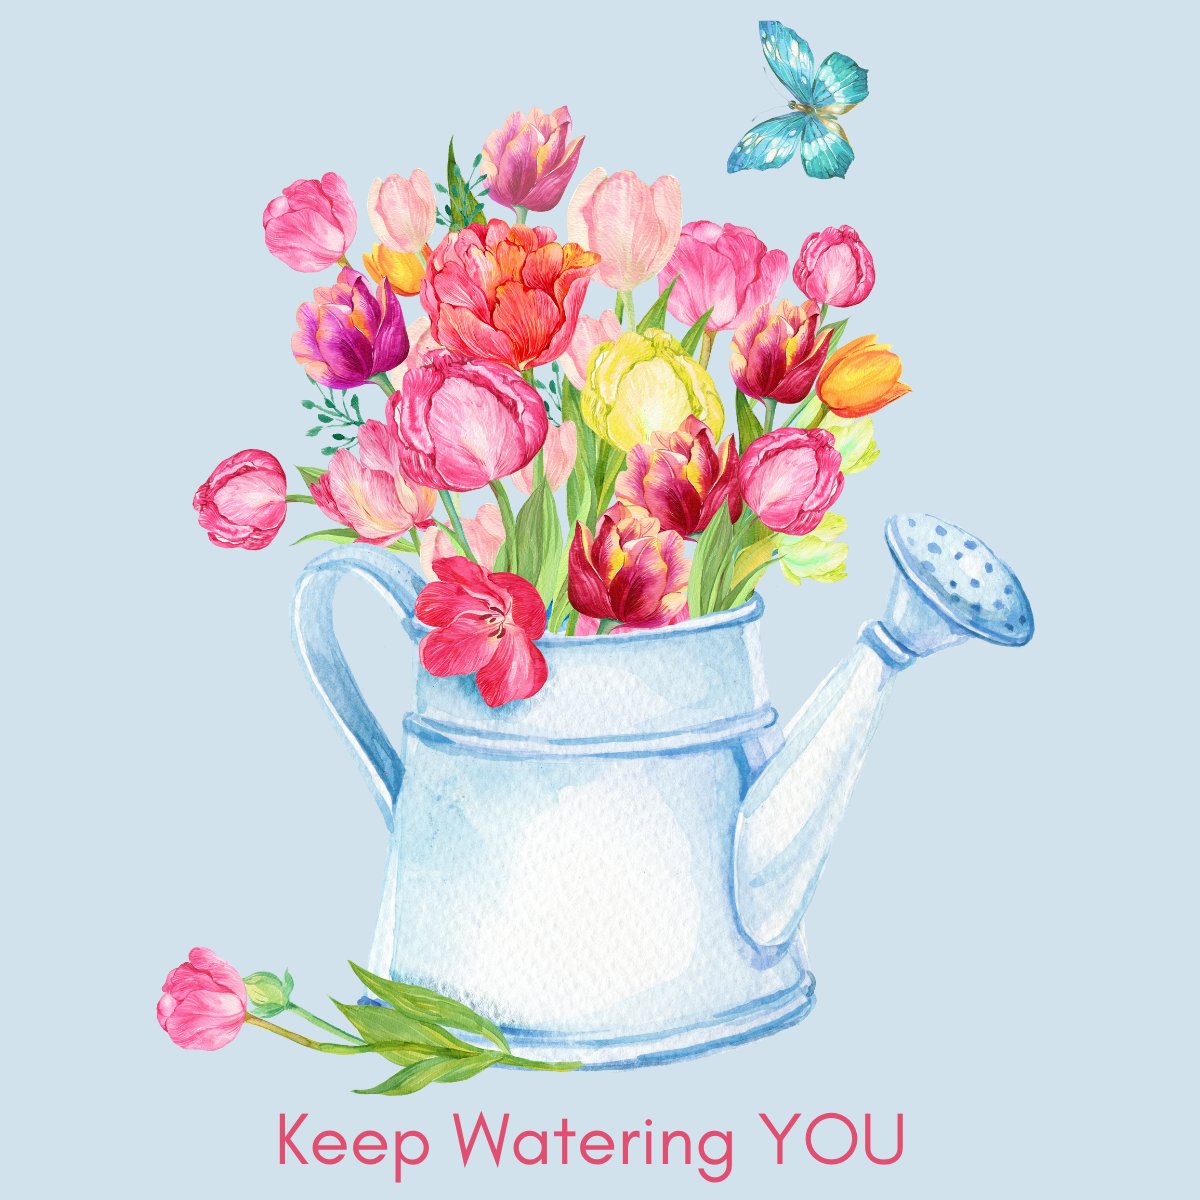 Keep Watering YOU Wednesday 🌻

Gardening can improve a heavy mood, dissipate feelings of #anxiety and reduce #stress. Start small and make a plan even if you only have a small garden you could plant in tubs or create a little herb or veggie box

#selfcare #gardentherapy☀️